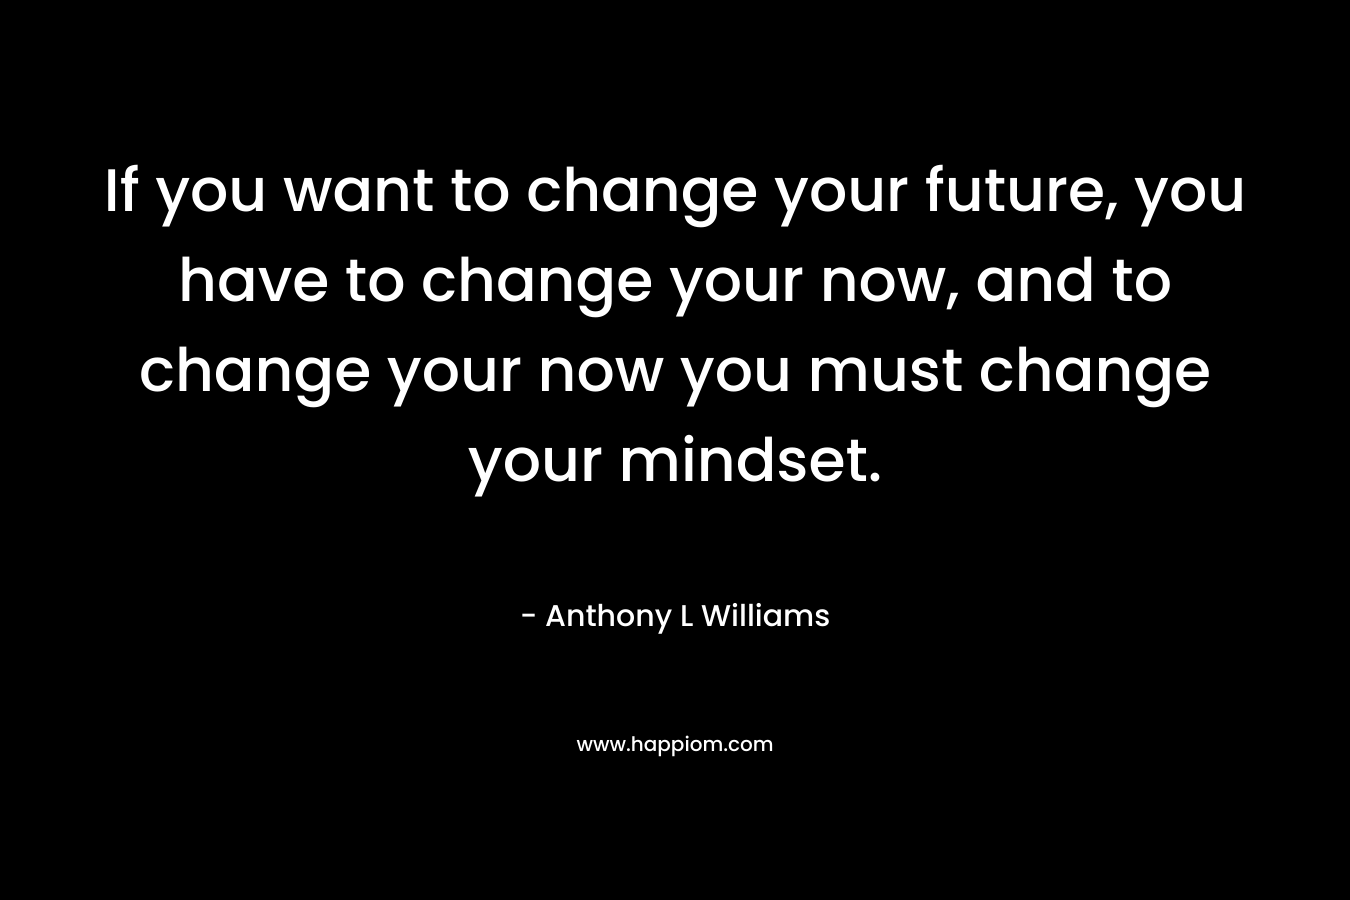 If you want to change your future, you have to change your now, and to change your now you must change your mindset.